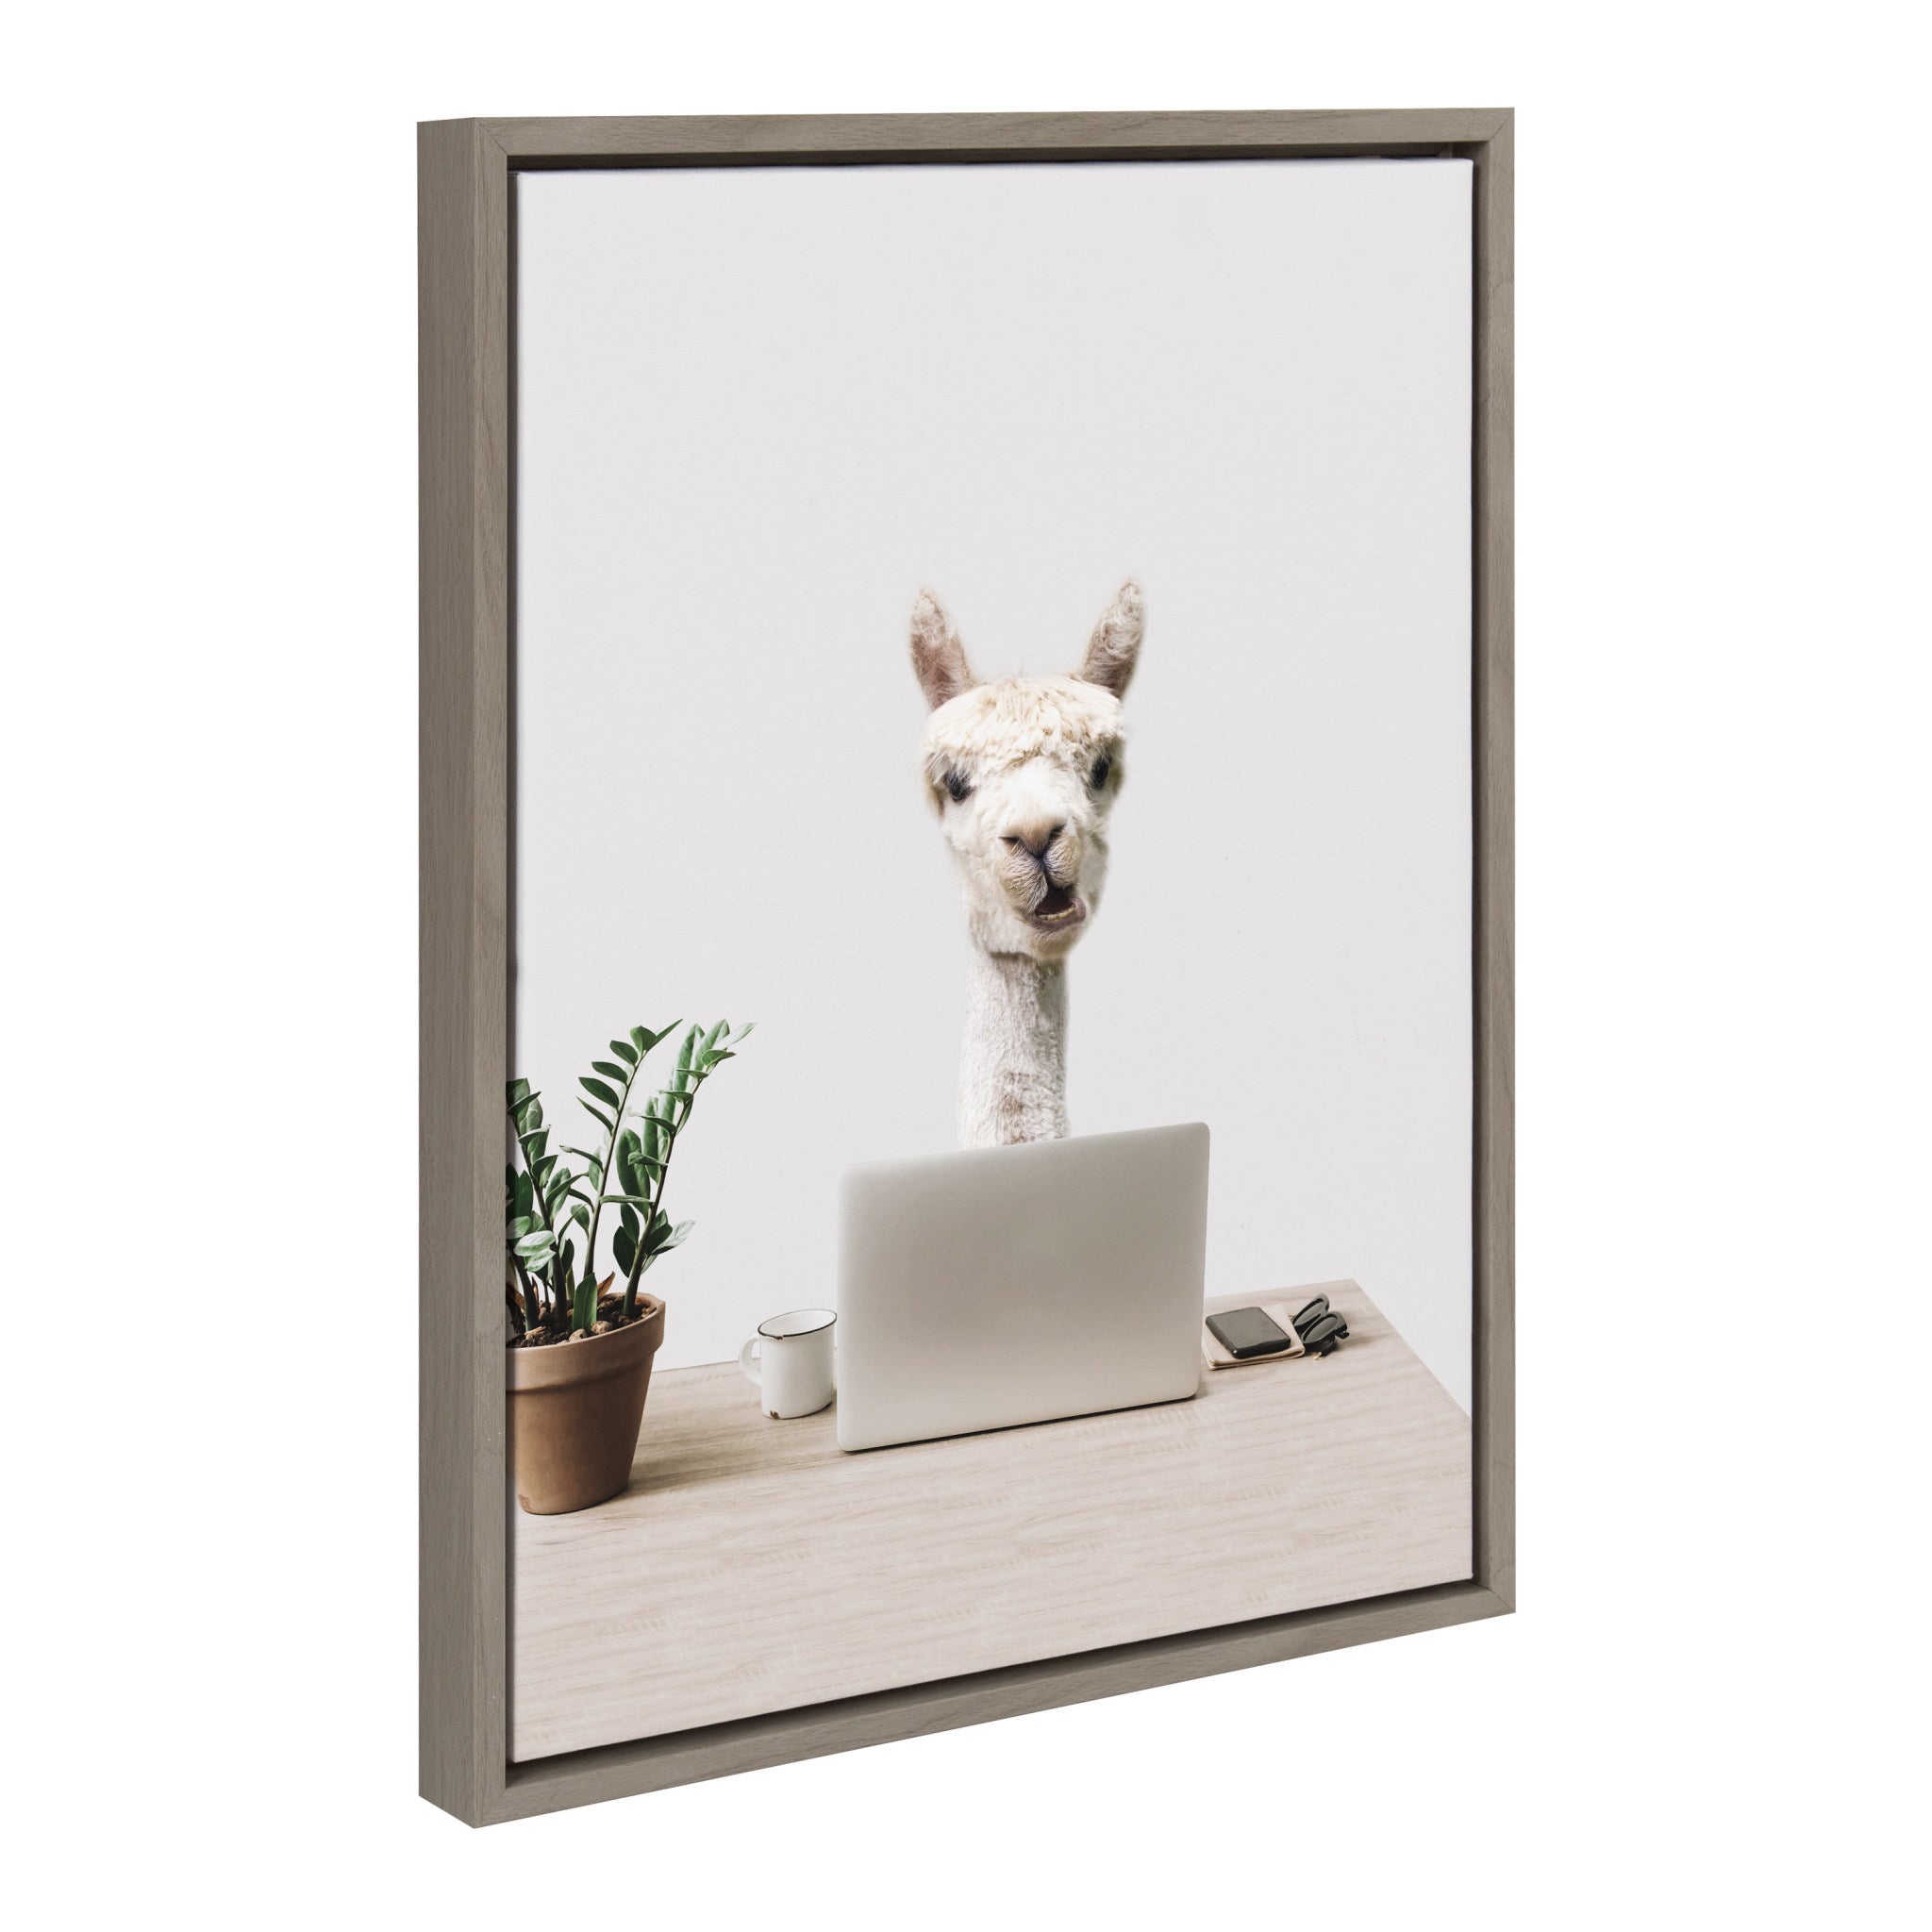 Sylvie Mr. Al Paca here,  I’m in Distribution Framed Canvas by The Creative Bunch Studio